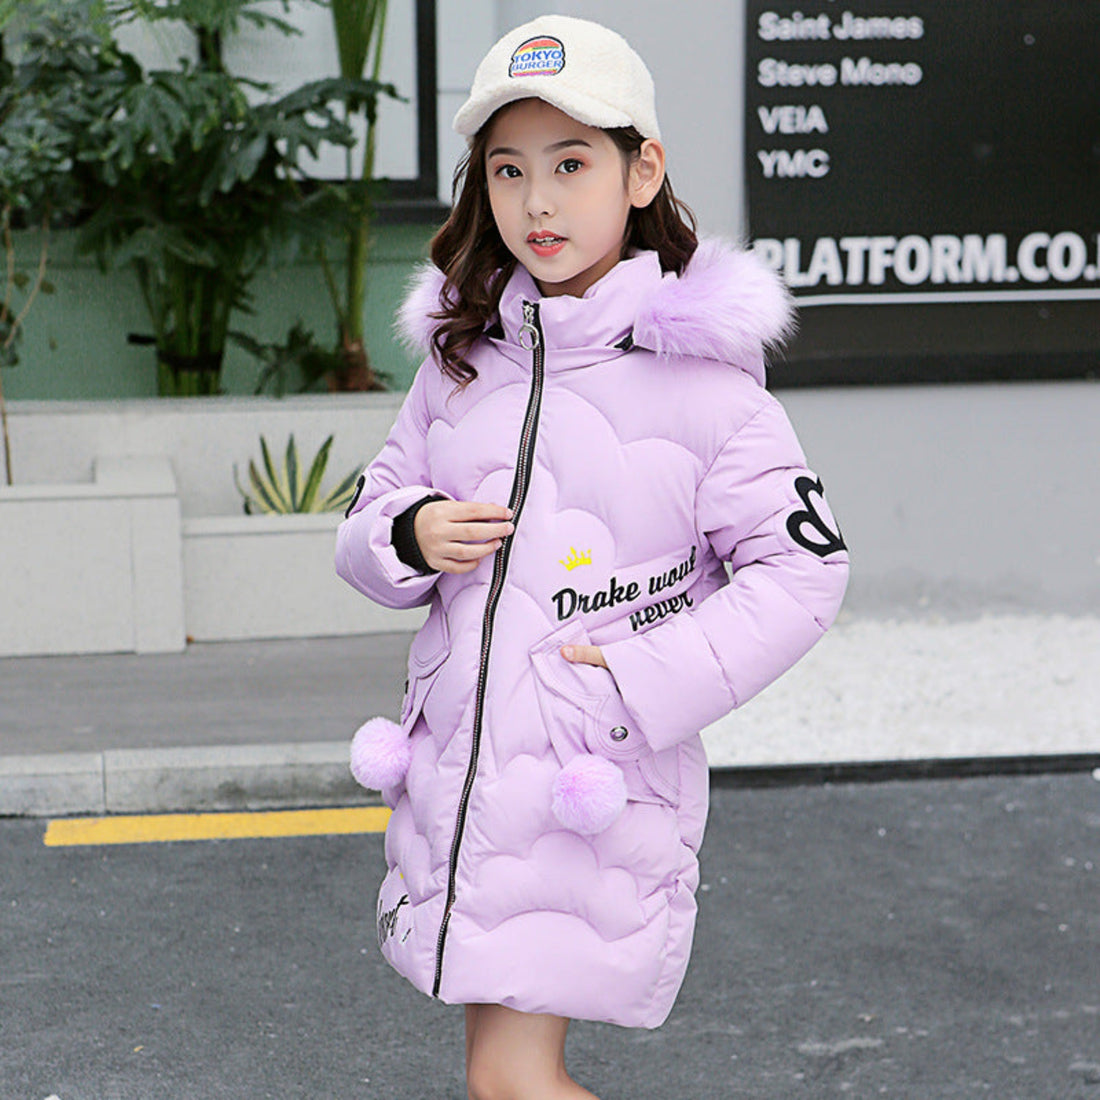 Stylish cotton-padded jacket for girls, ideal for winter outings.